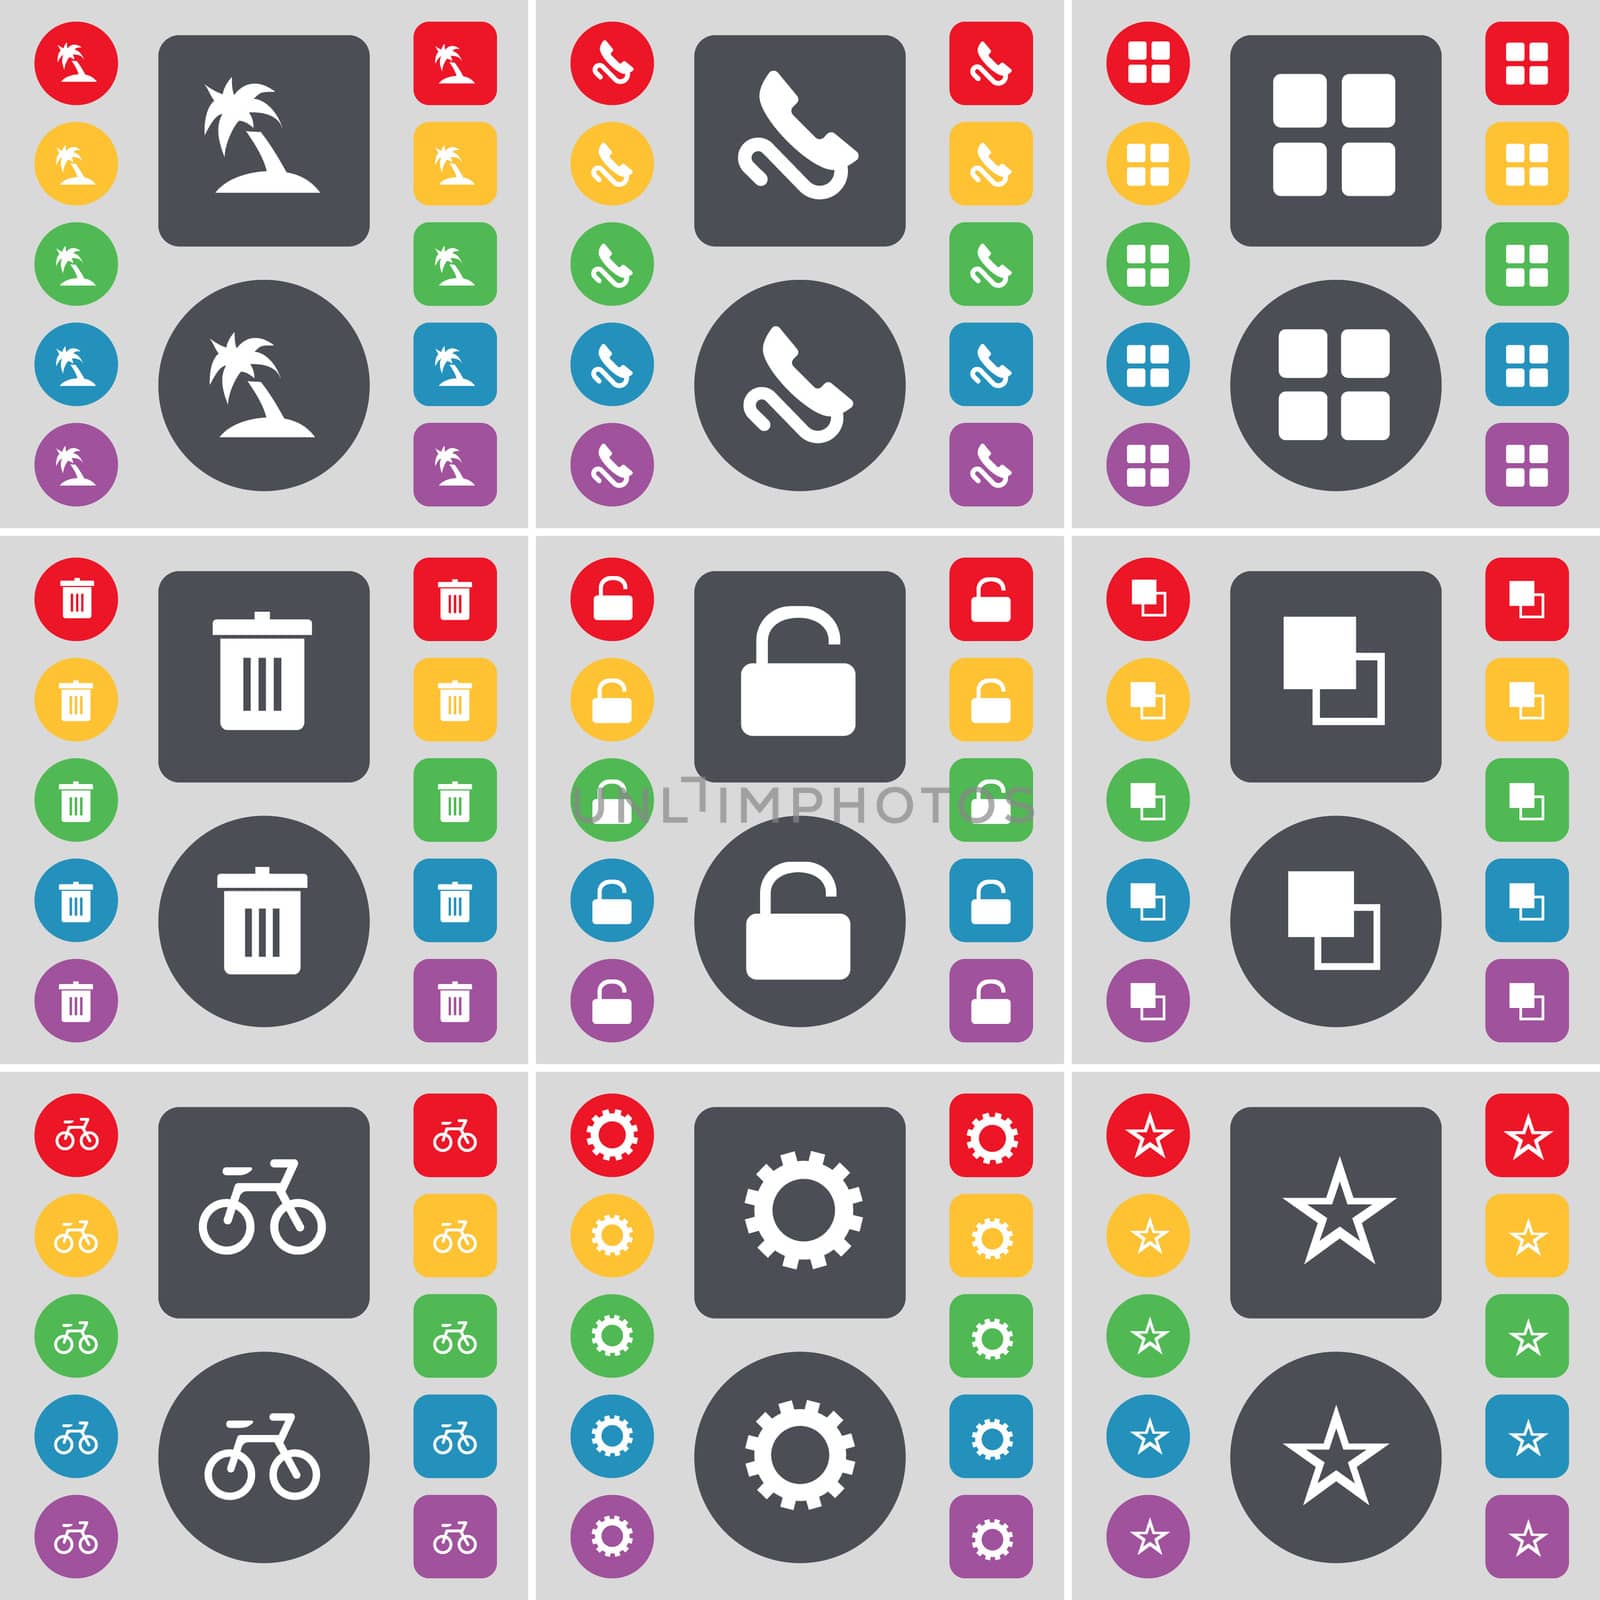 Palm, Receiver, Apps, Trash can, Lock, Copy, Bicycle, Gear, Star icon symbol. A large set of flat, colored buttons for your design.  by serhii_lohvyniuk